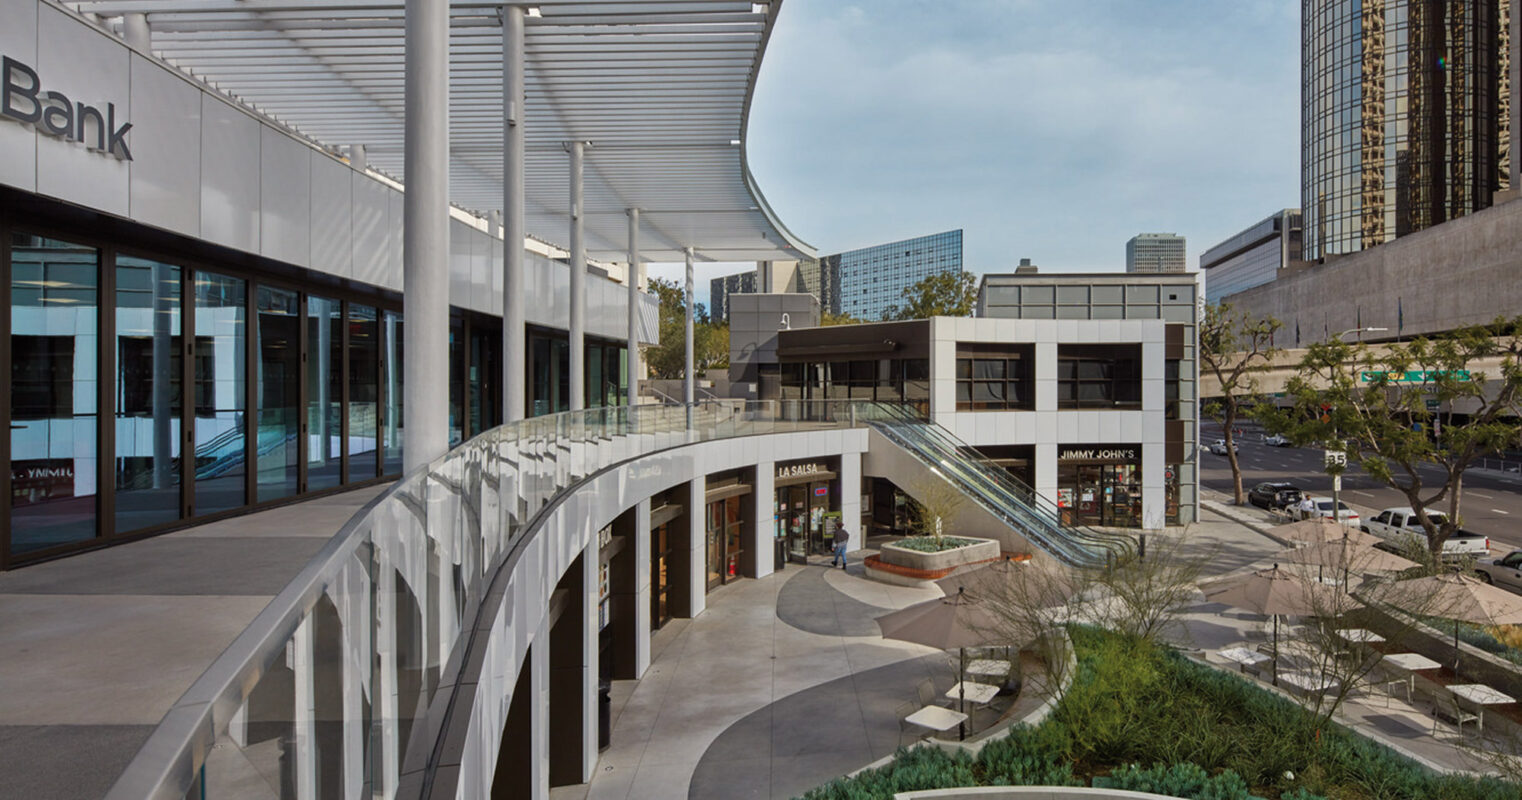 Modern urban plaza featuring curvilinear walkways, streamlined metal pergolas, lush landscaping, and multi-level commercial spaces under a clear sky, illustrating thoughtful integration of open-air design and contemporary architecture.